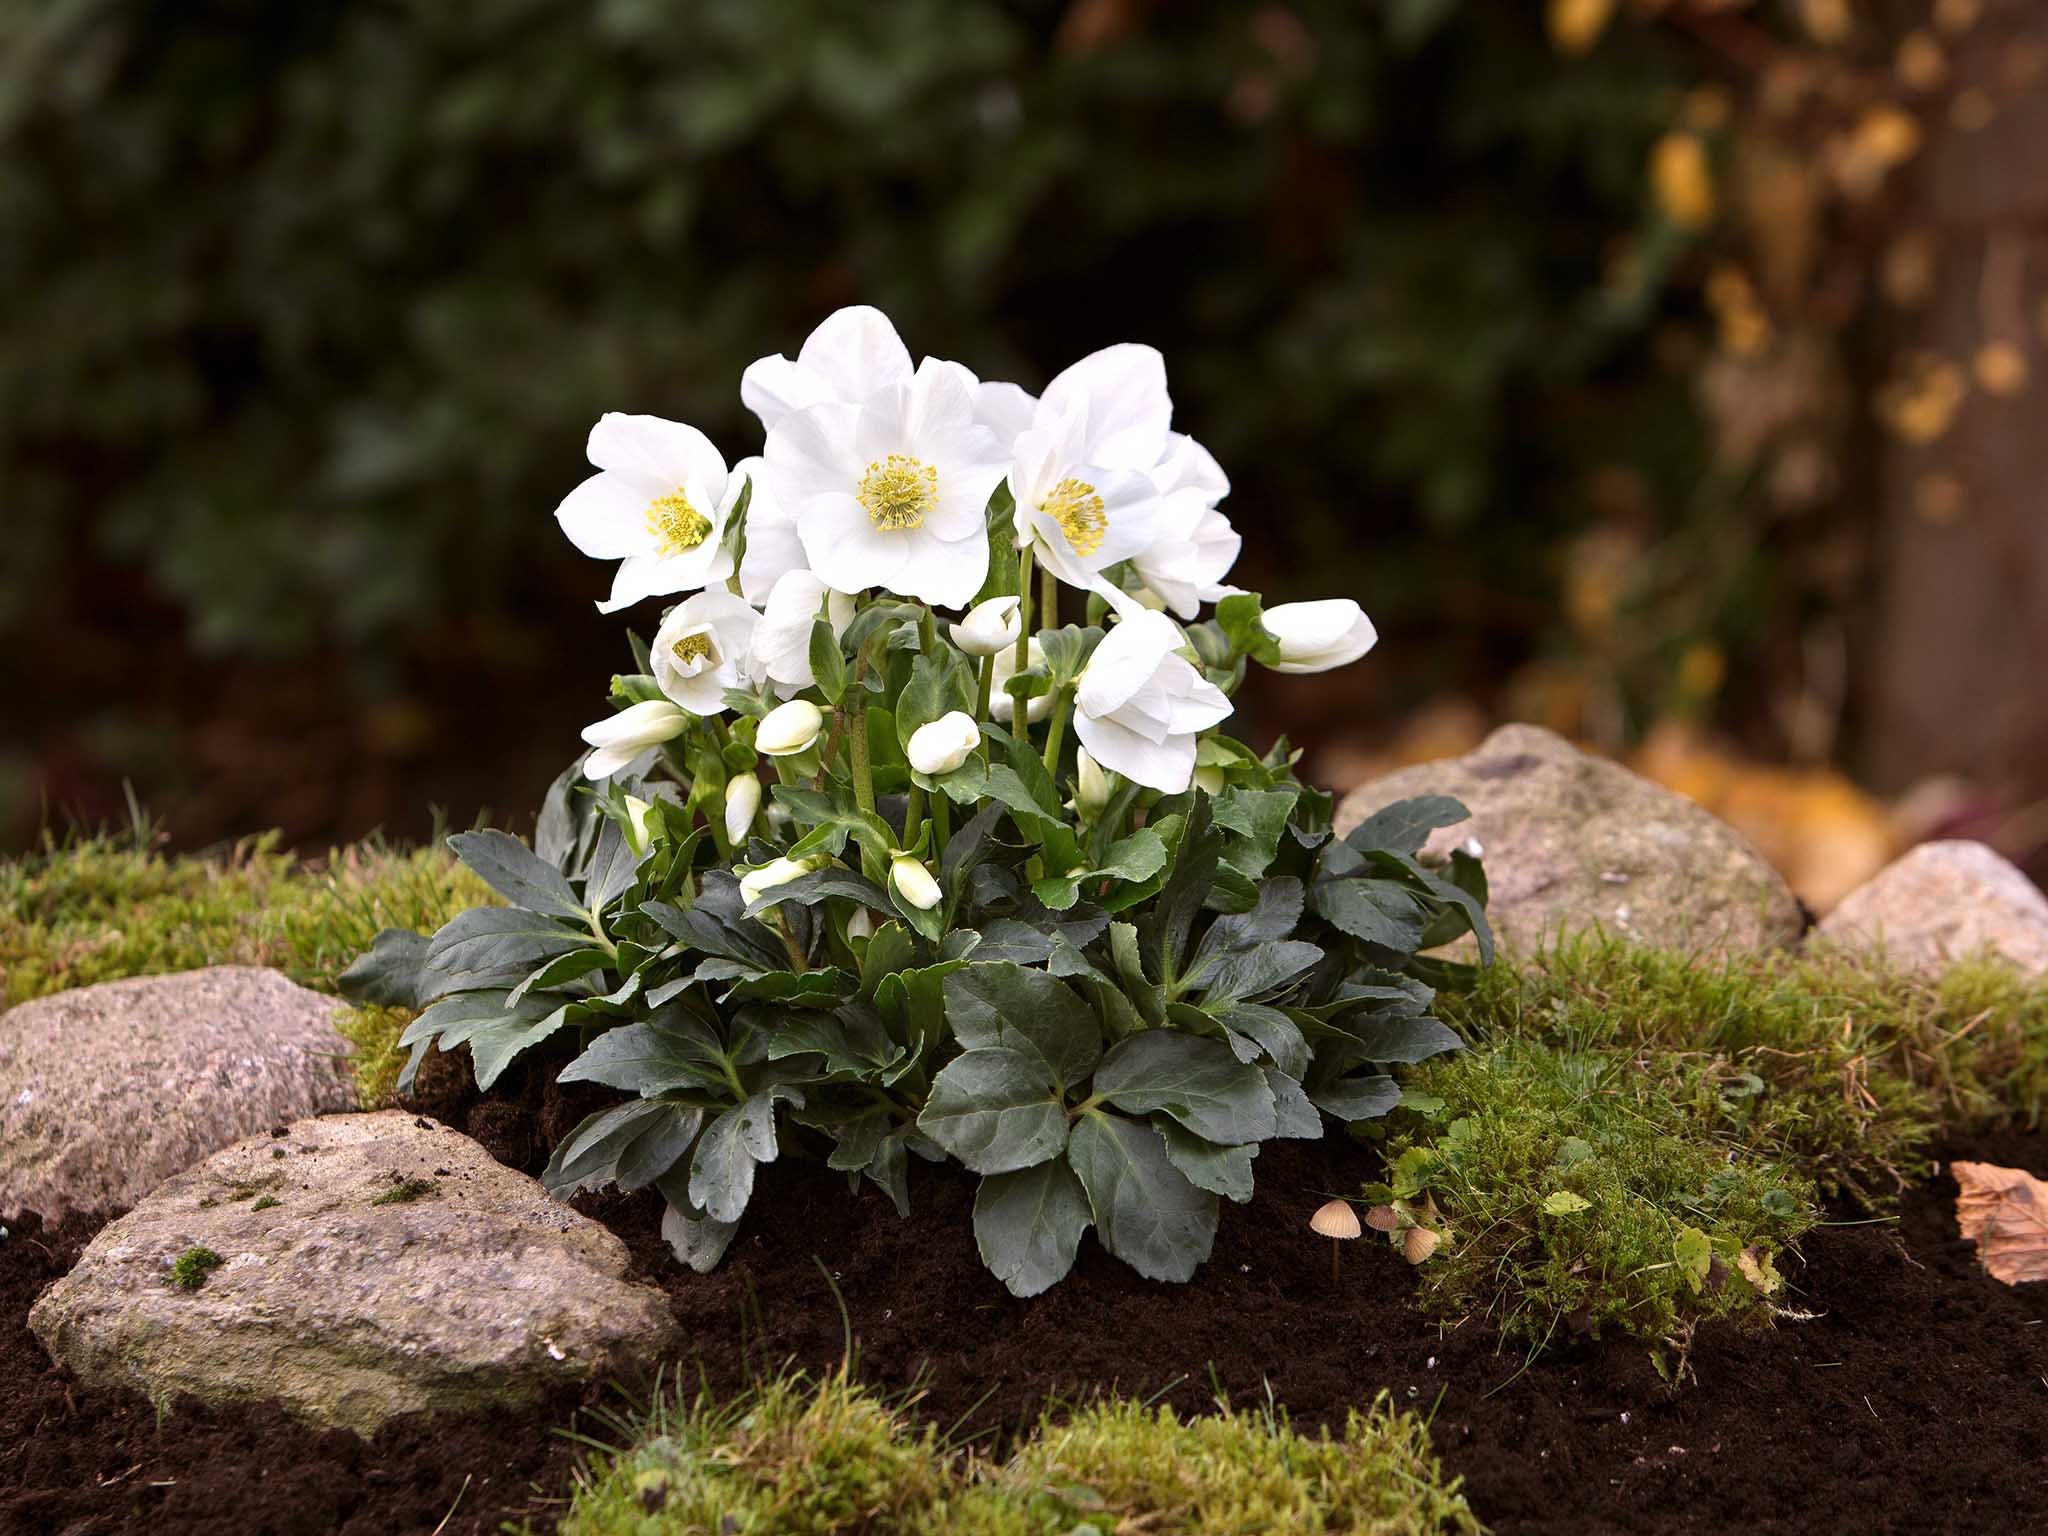 Christmas rose hybrids are sold in pots but flourish outdoors